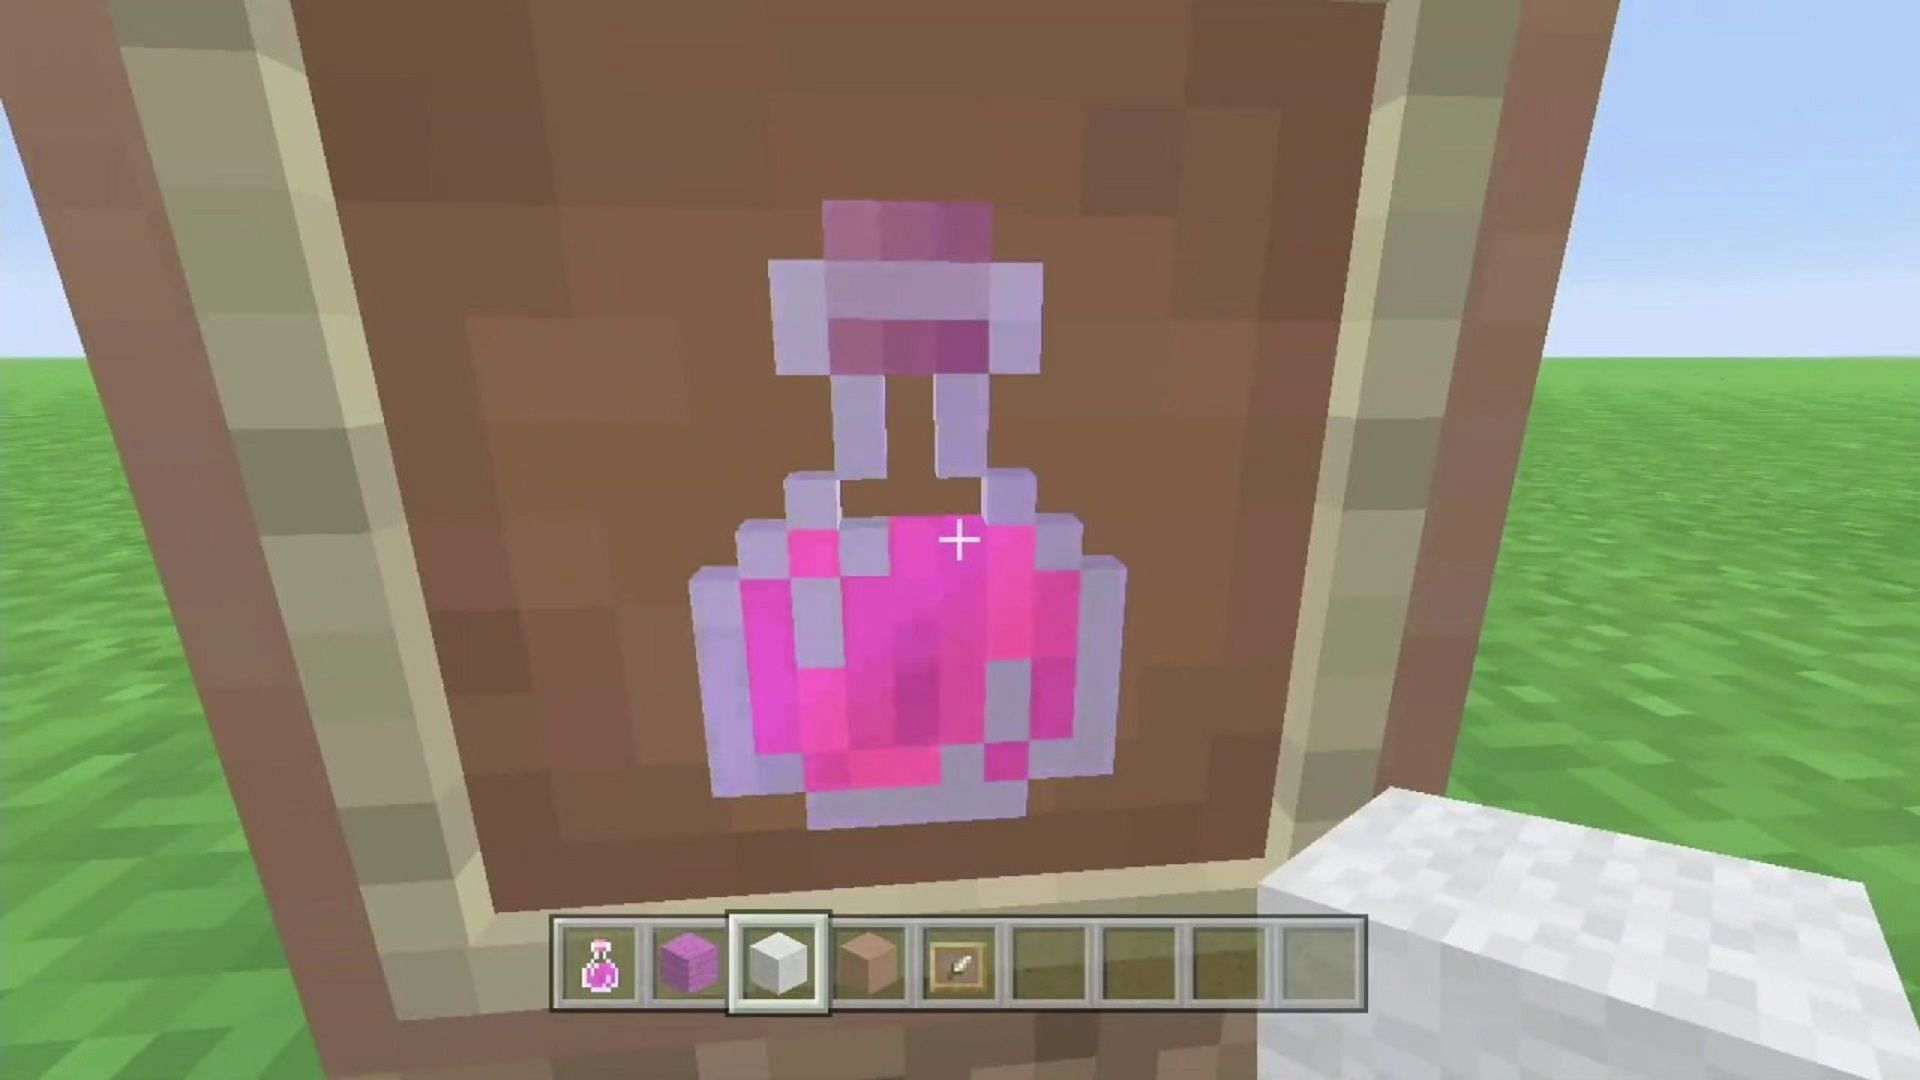 A potion of healing (Image via Gamer 606/YouTube)